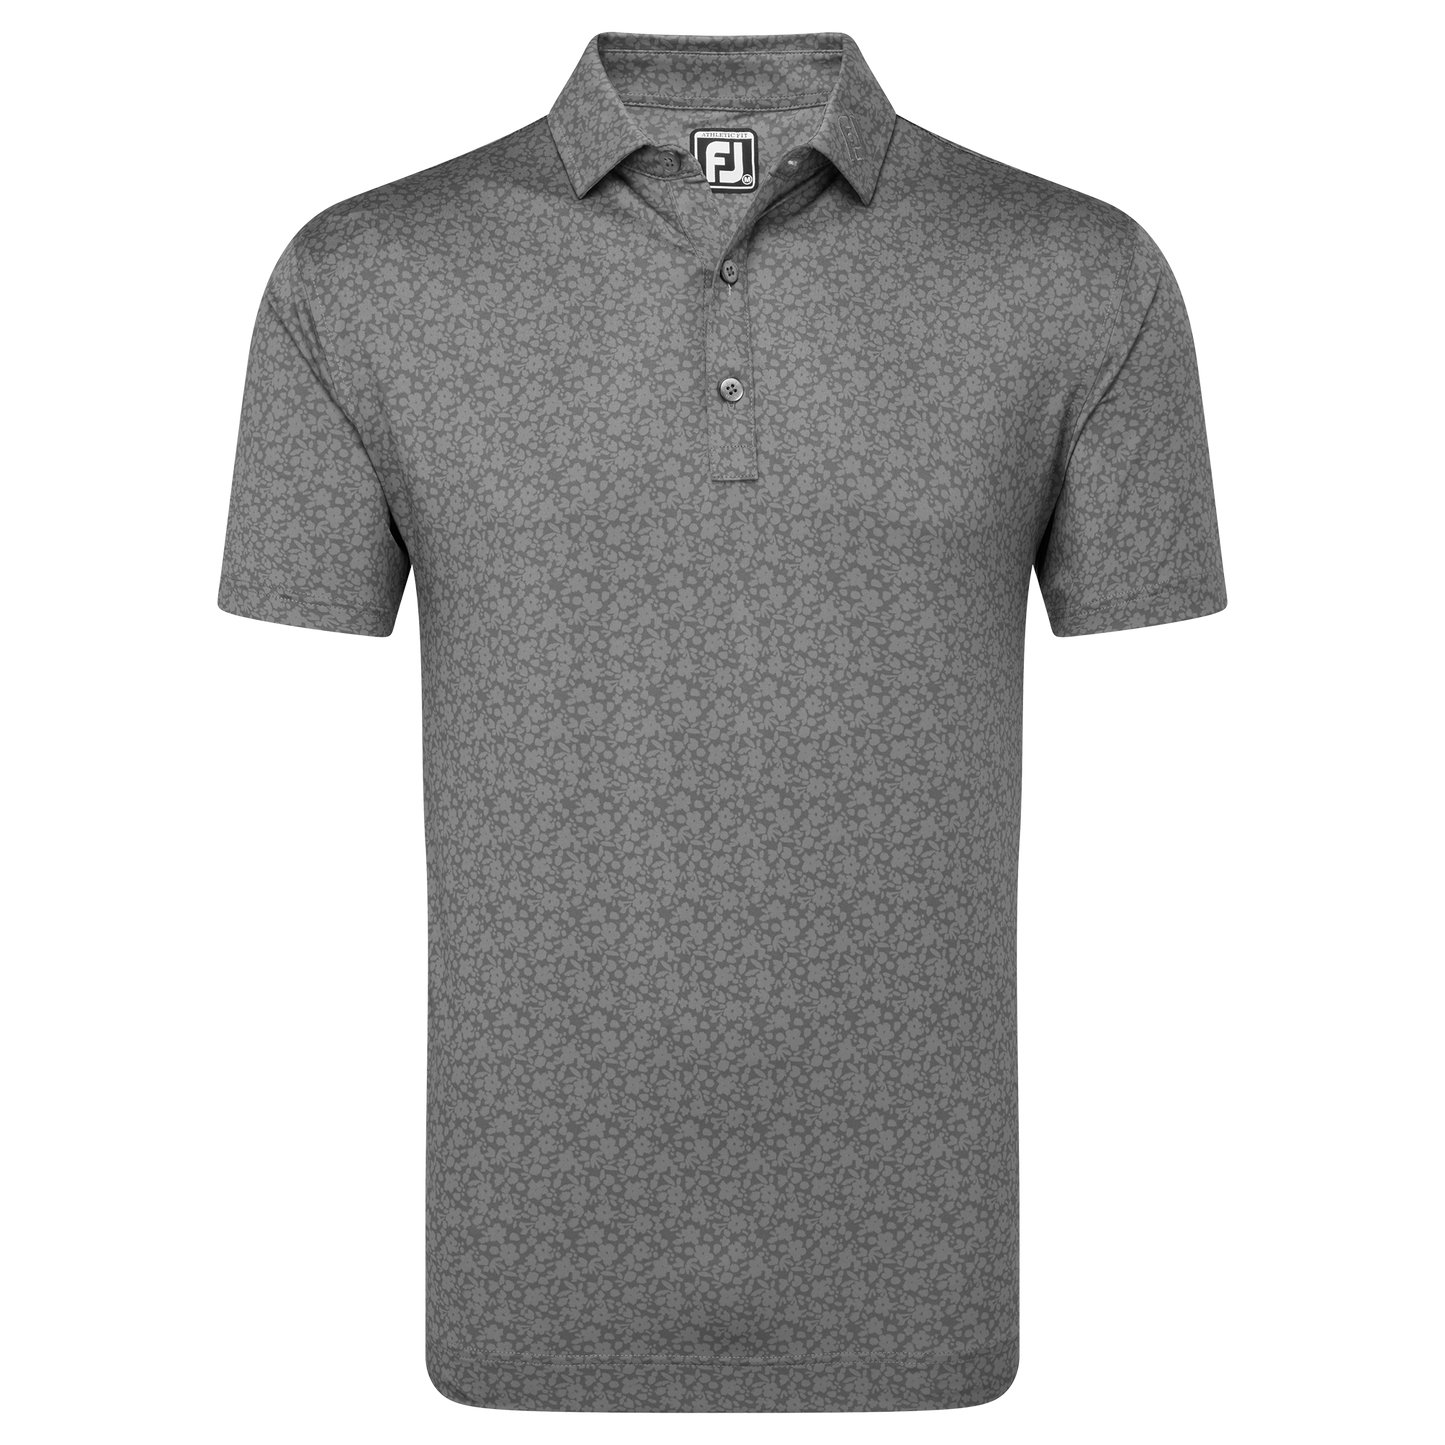 FootJoy Golf Painted Floral Polo Shirt 81622 Gravel M 